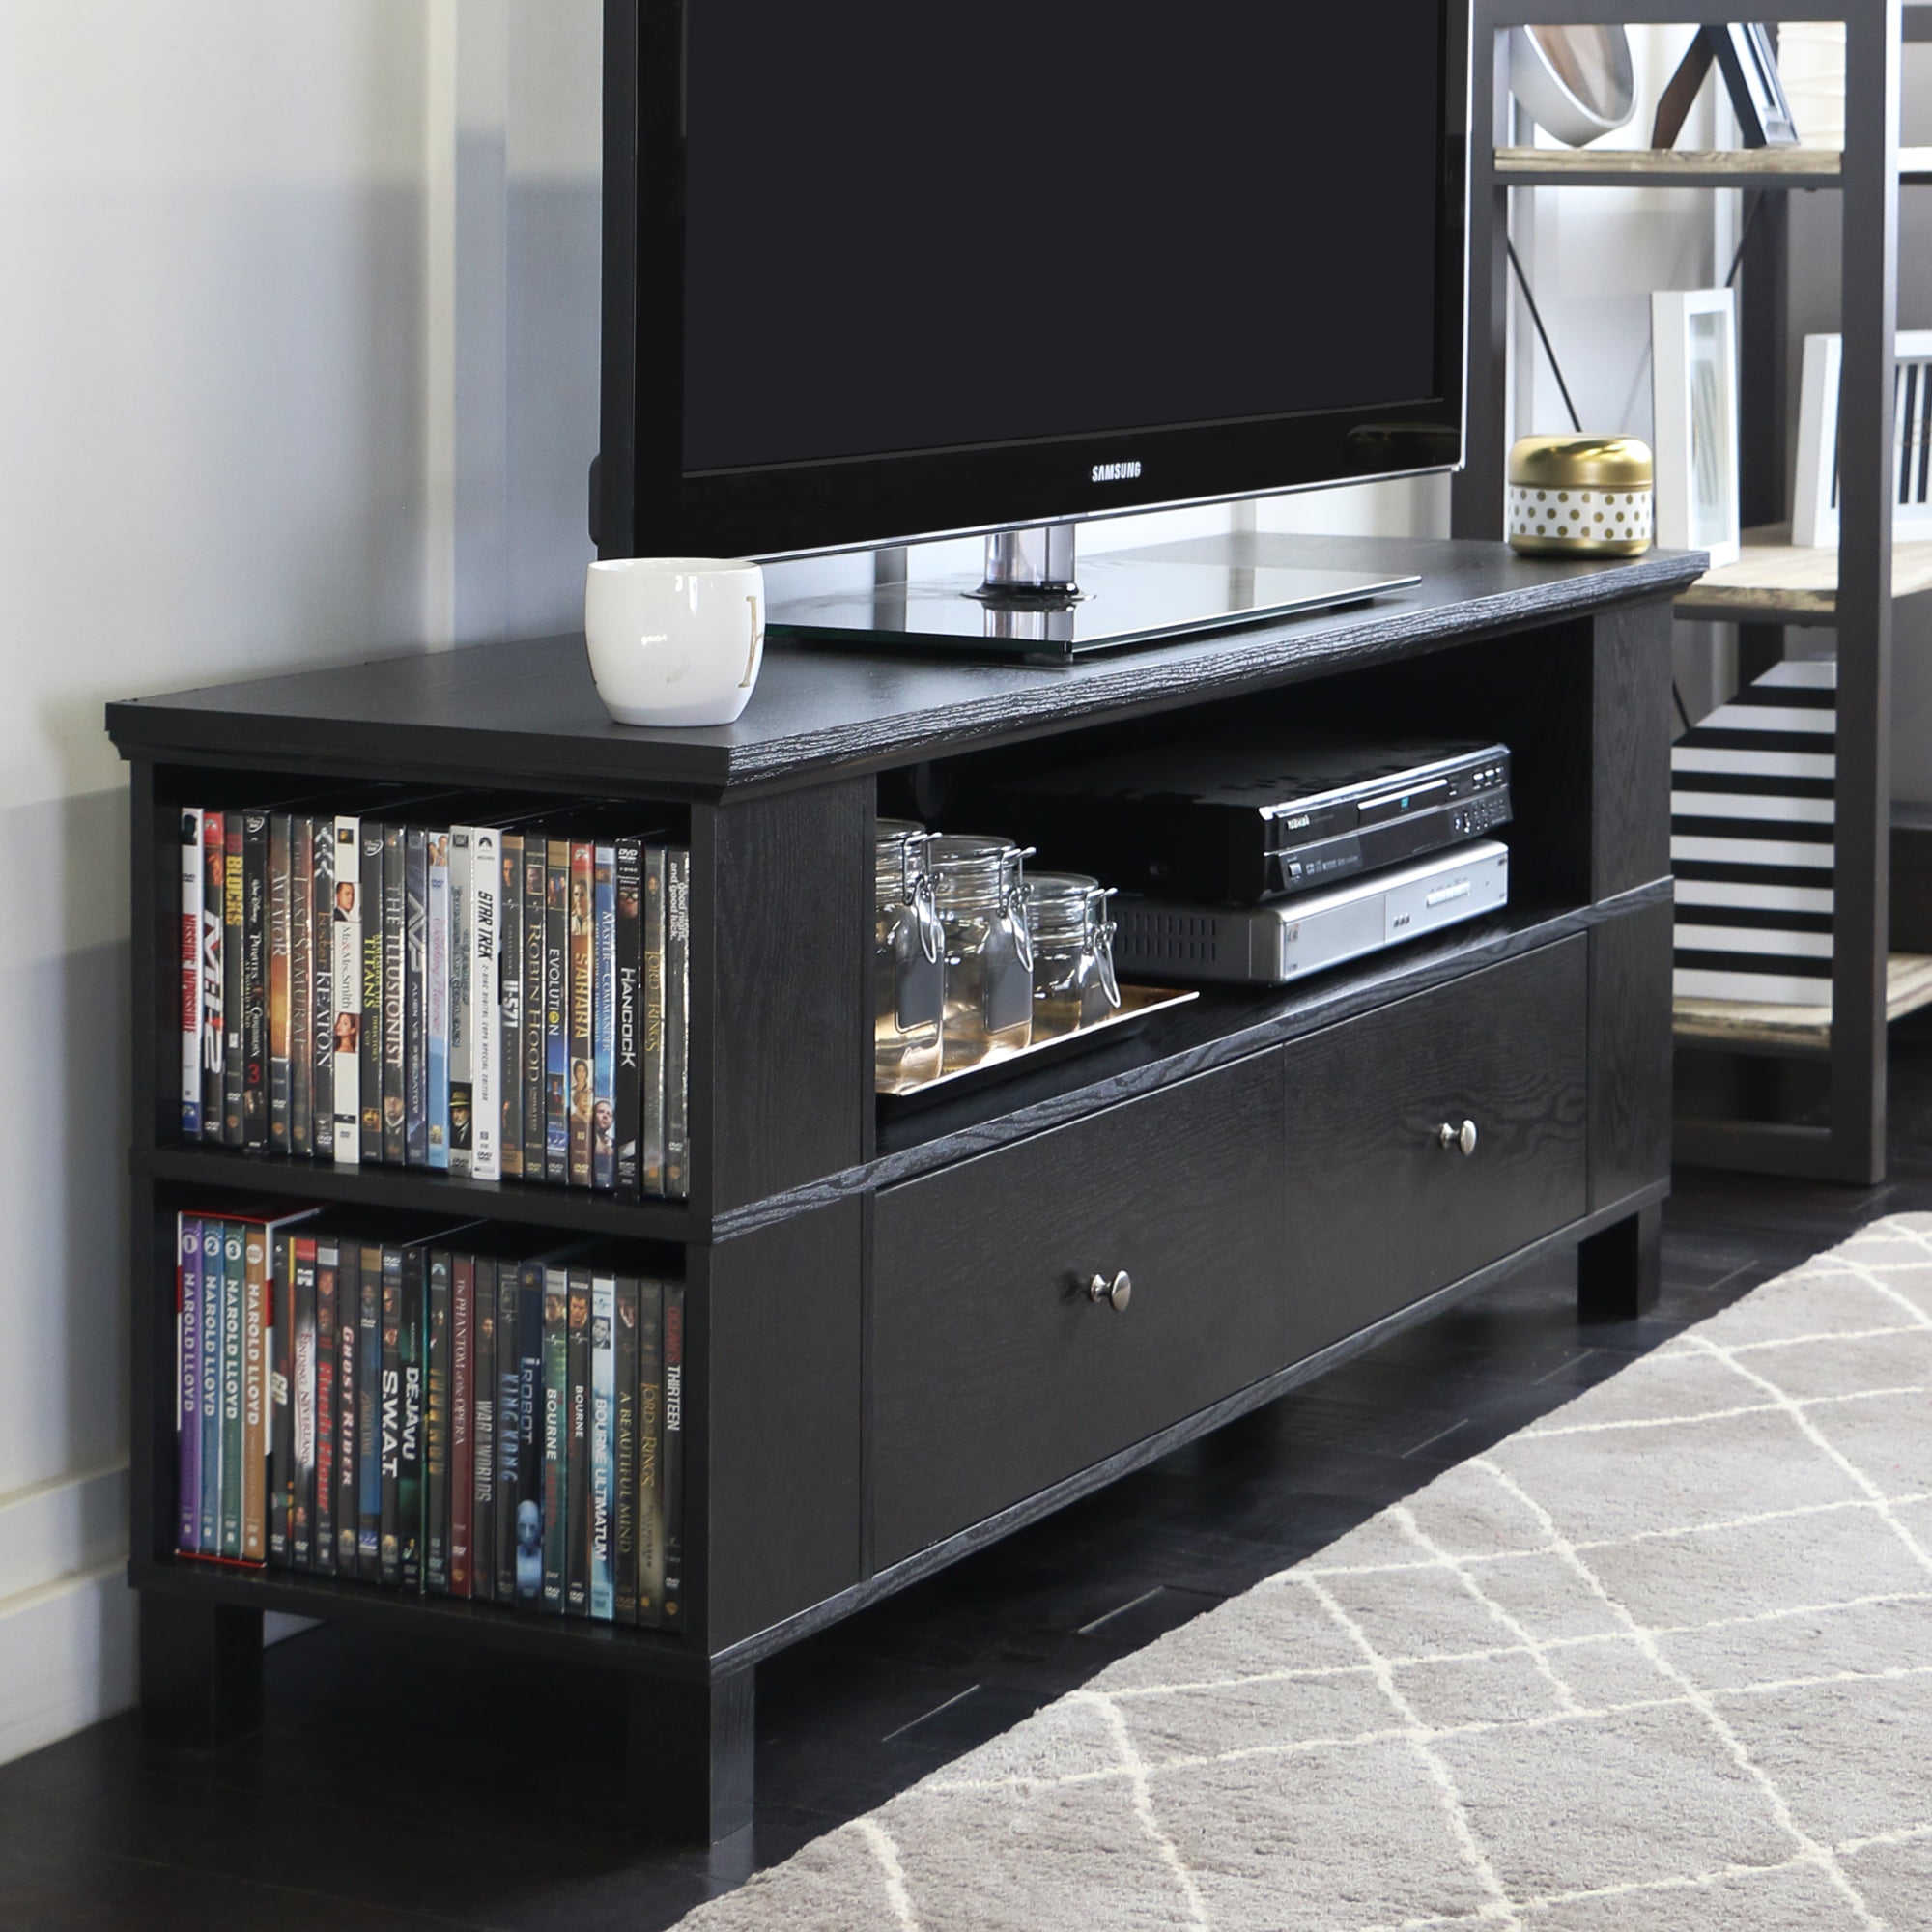 better homes and gardens tv stand instructions